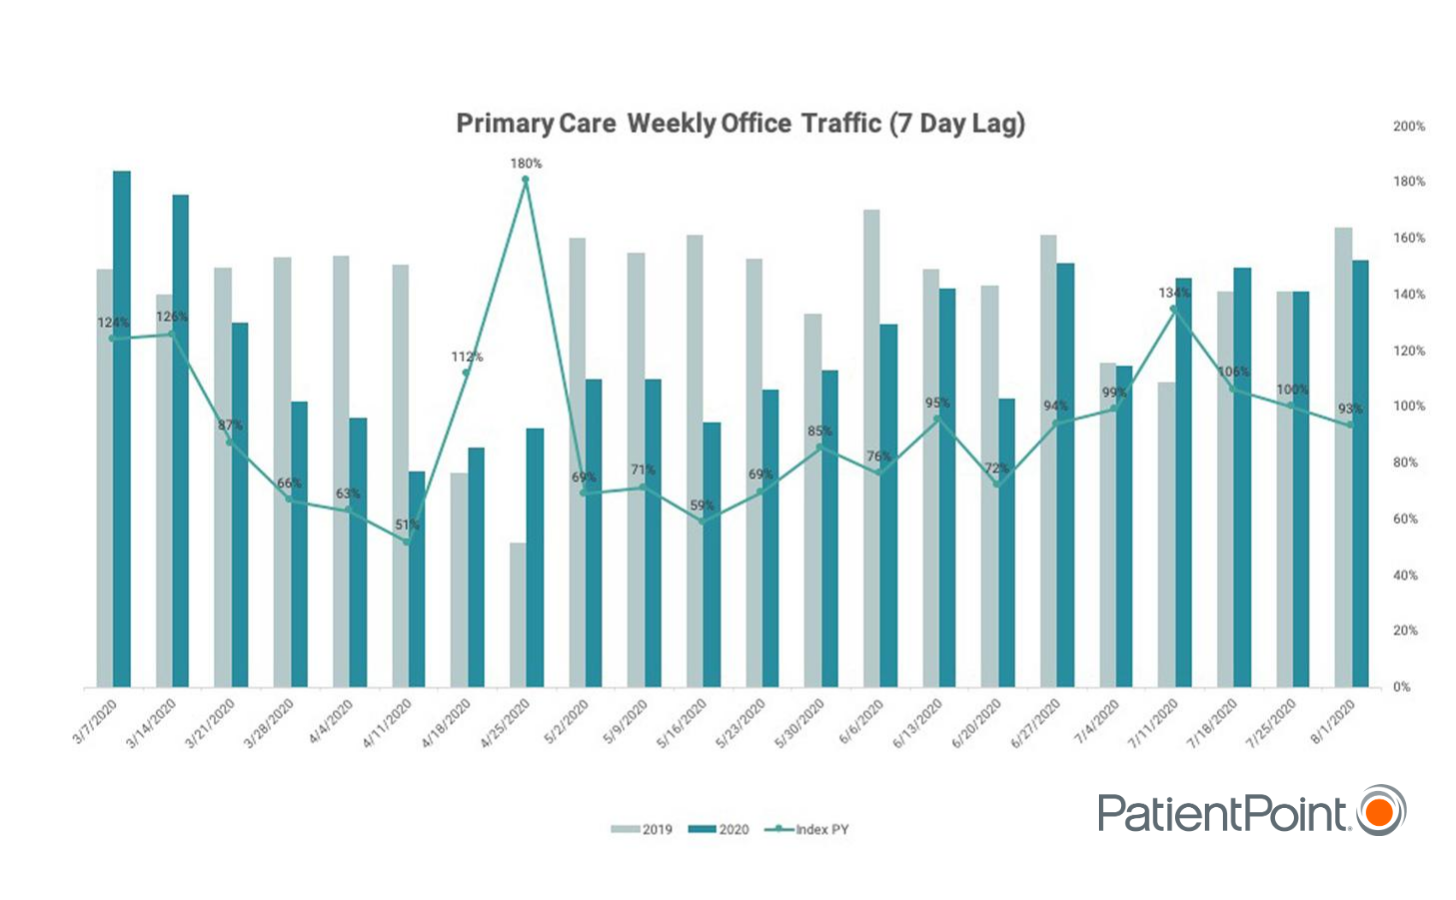 A graph reflecting recent patient traffic data to physician offices that underscores that patients are continuing to return to the doctor's office.